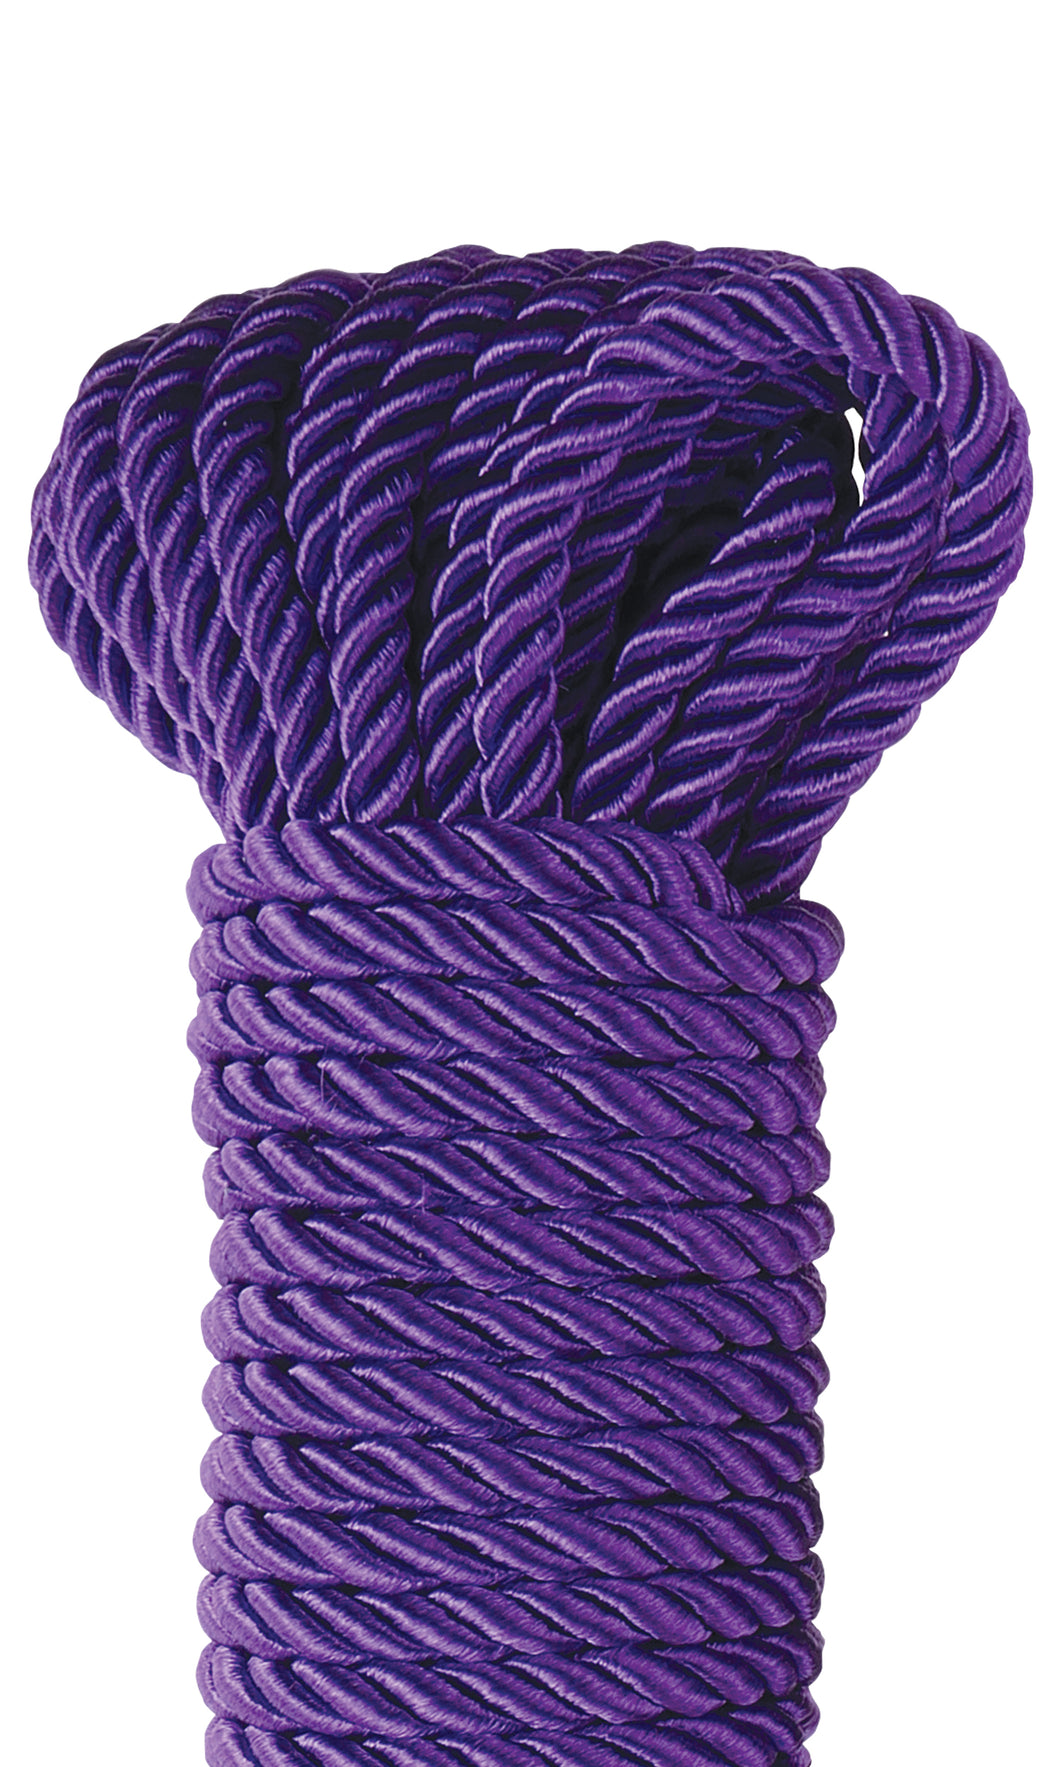 Fetish Fantasy Series Deluxe Silky Rope - Purple PD3865-12